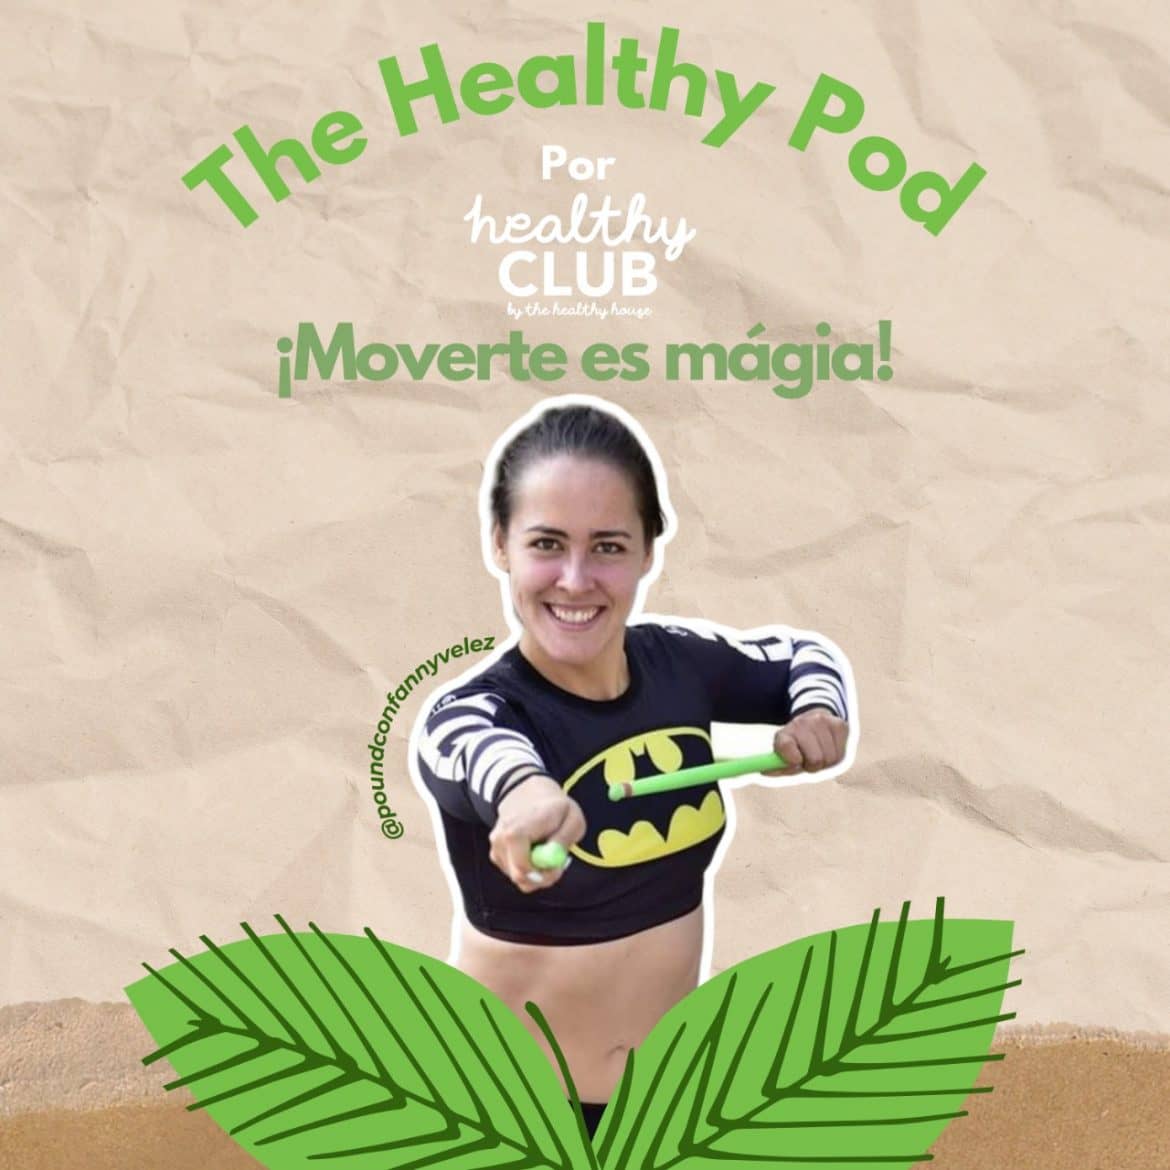 defragmx podcast the healthy pod moverse es magia